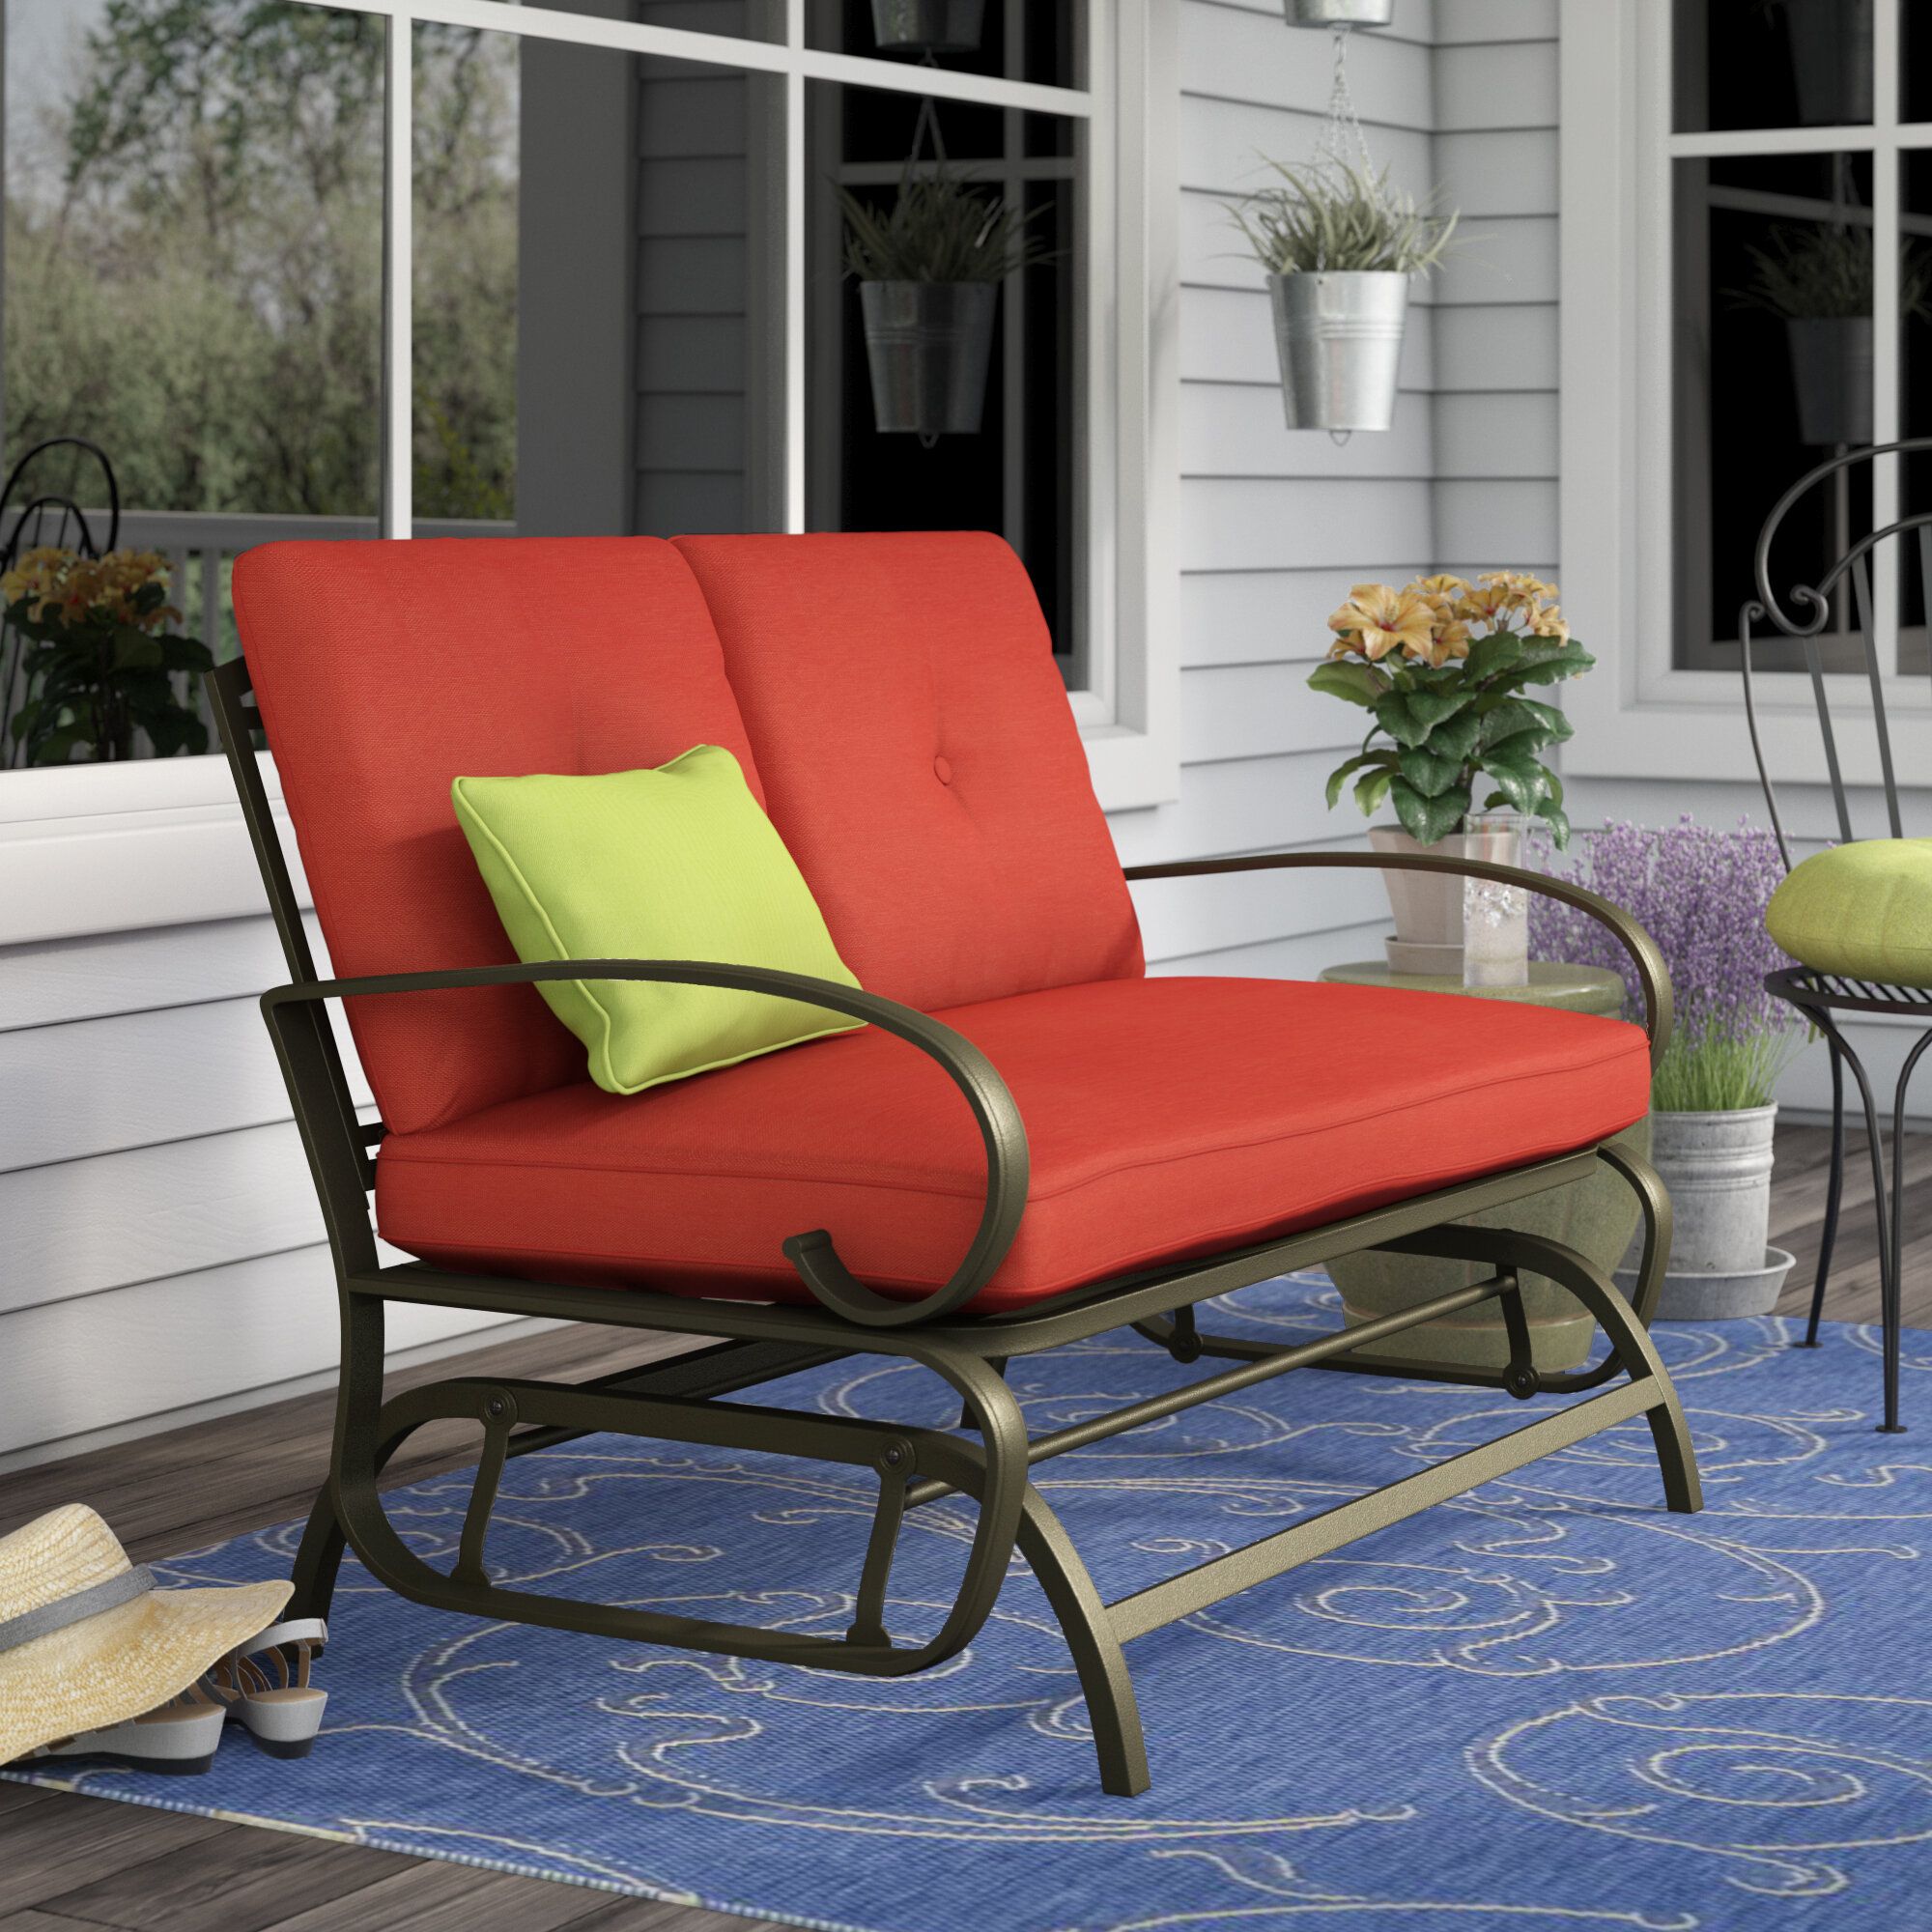 outdoor glider cushions